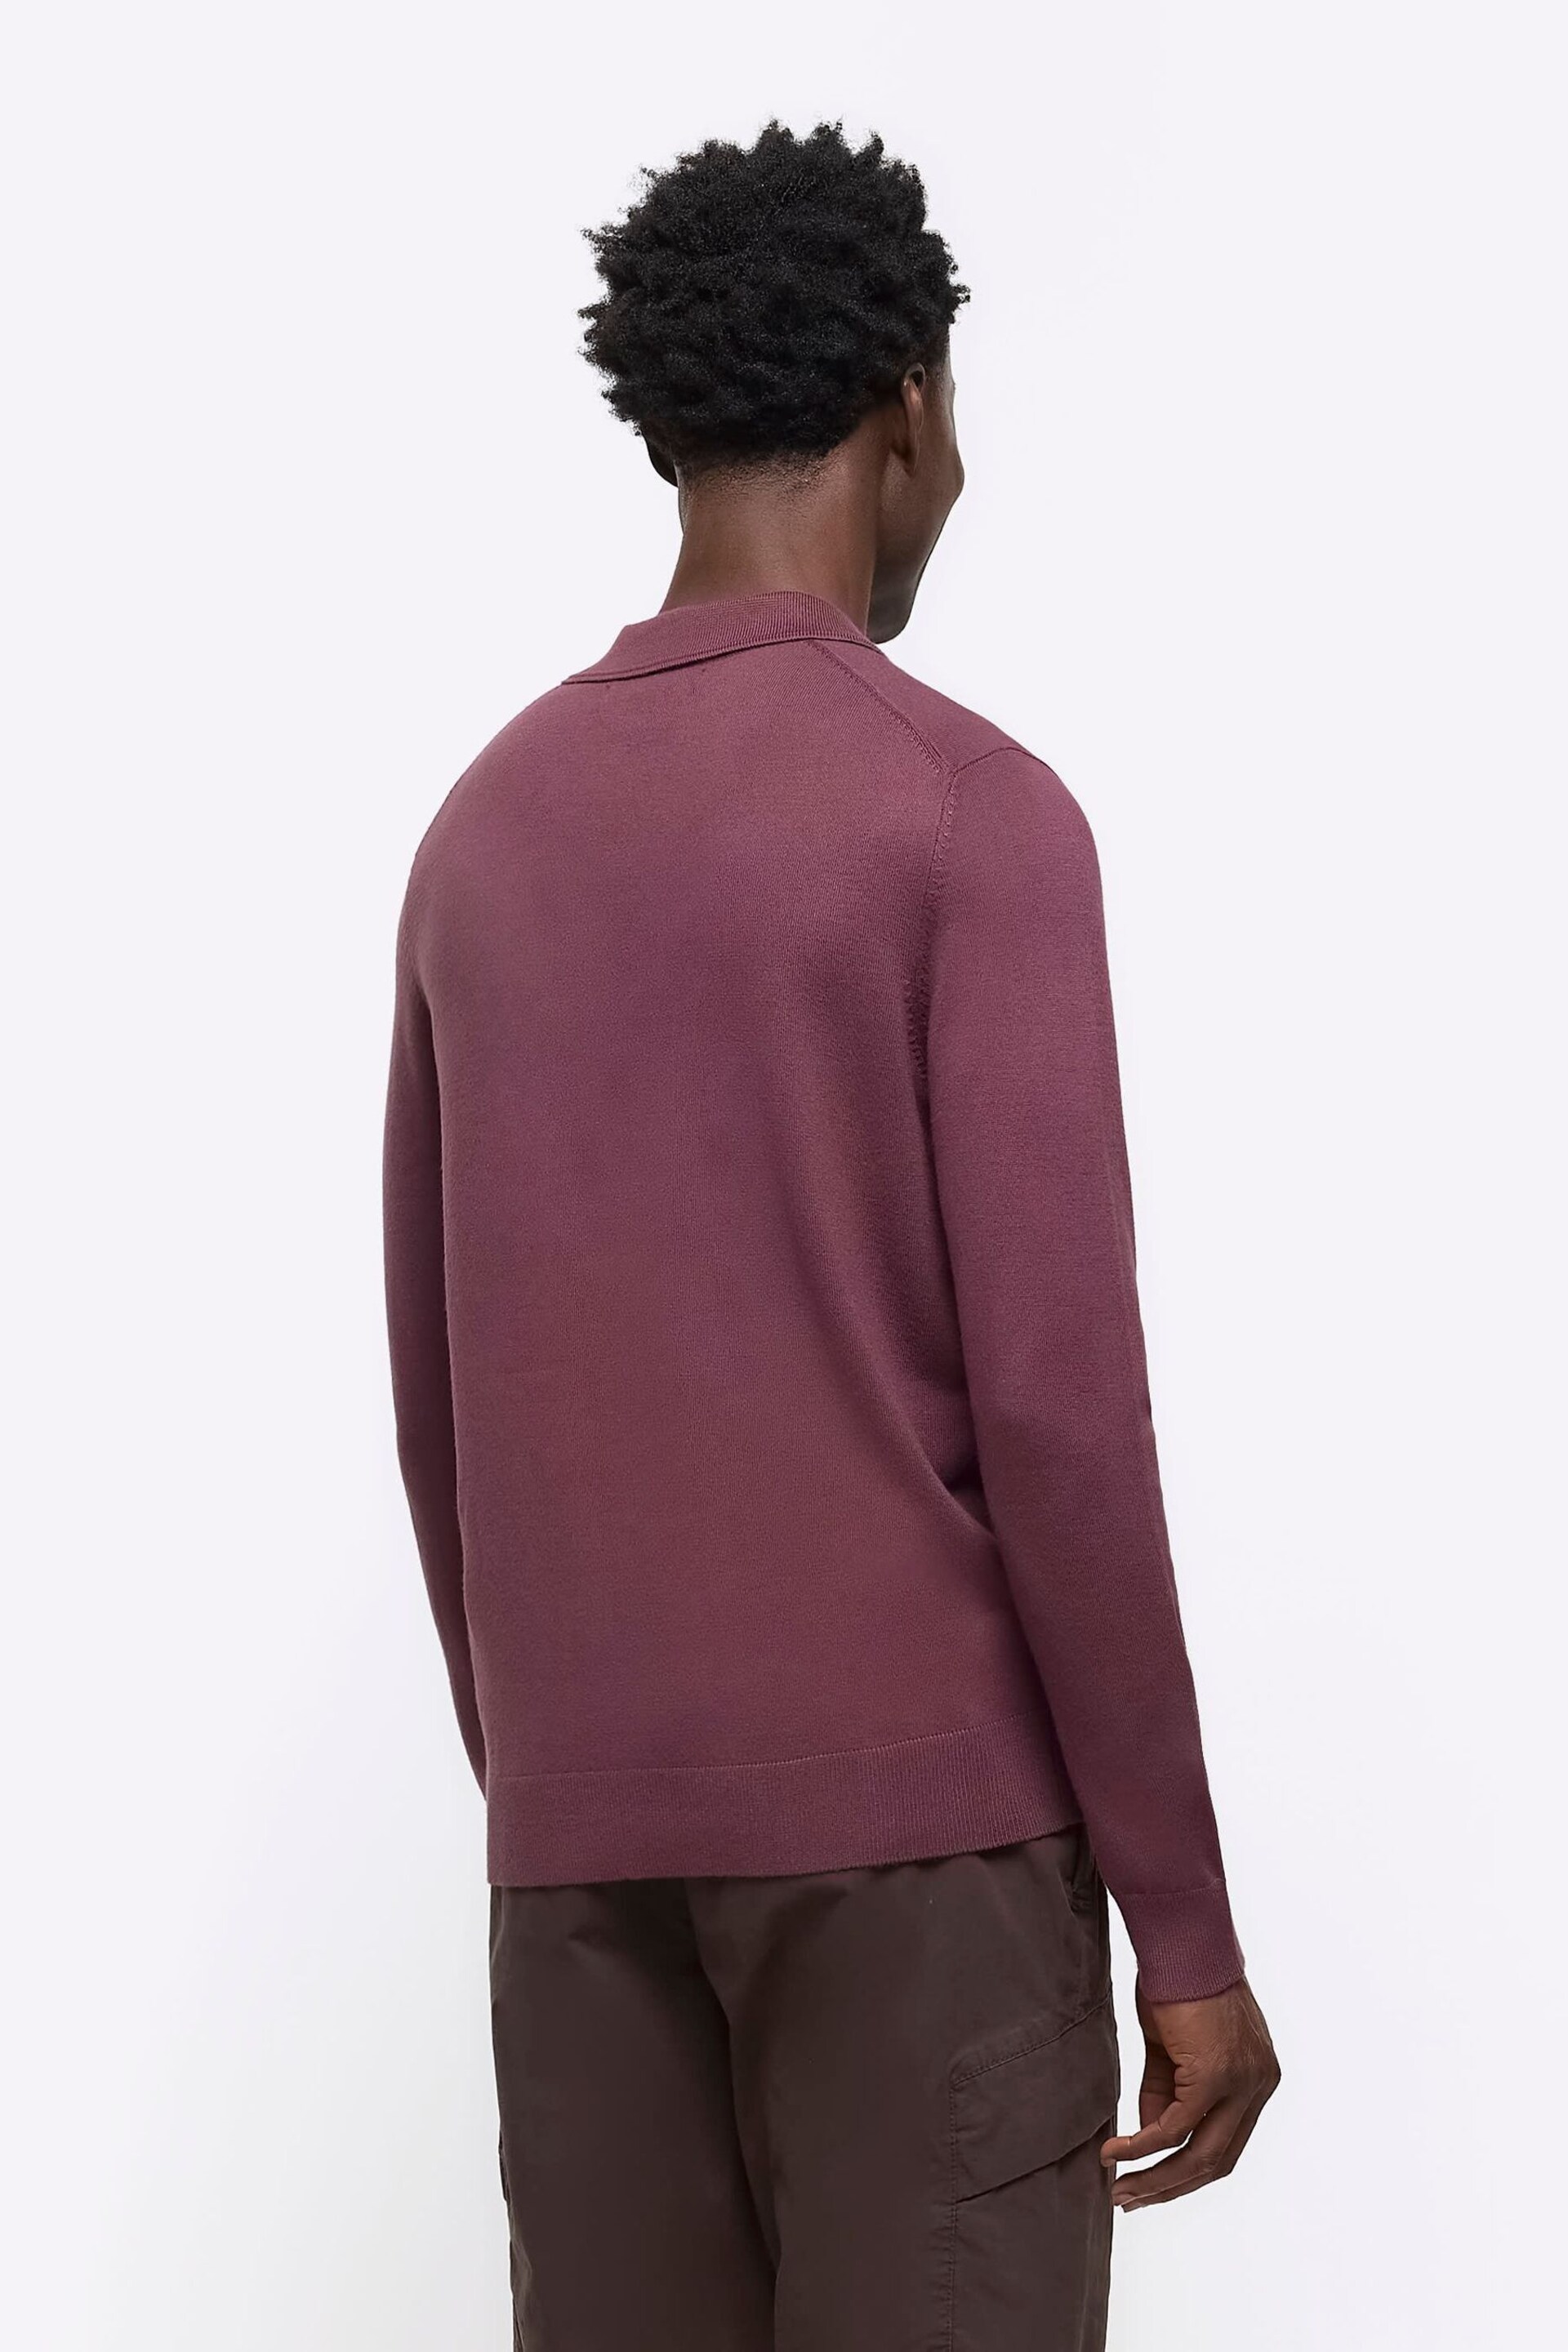 River Island Purple Knitted Polo Jumper - Image 3 of 7